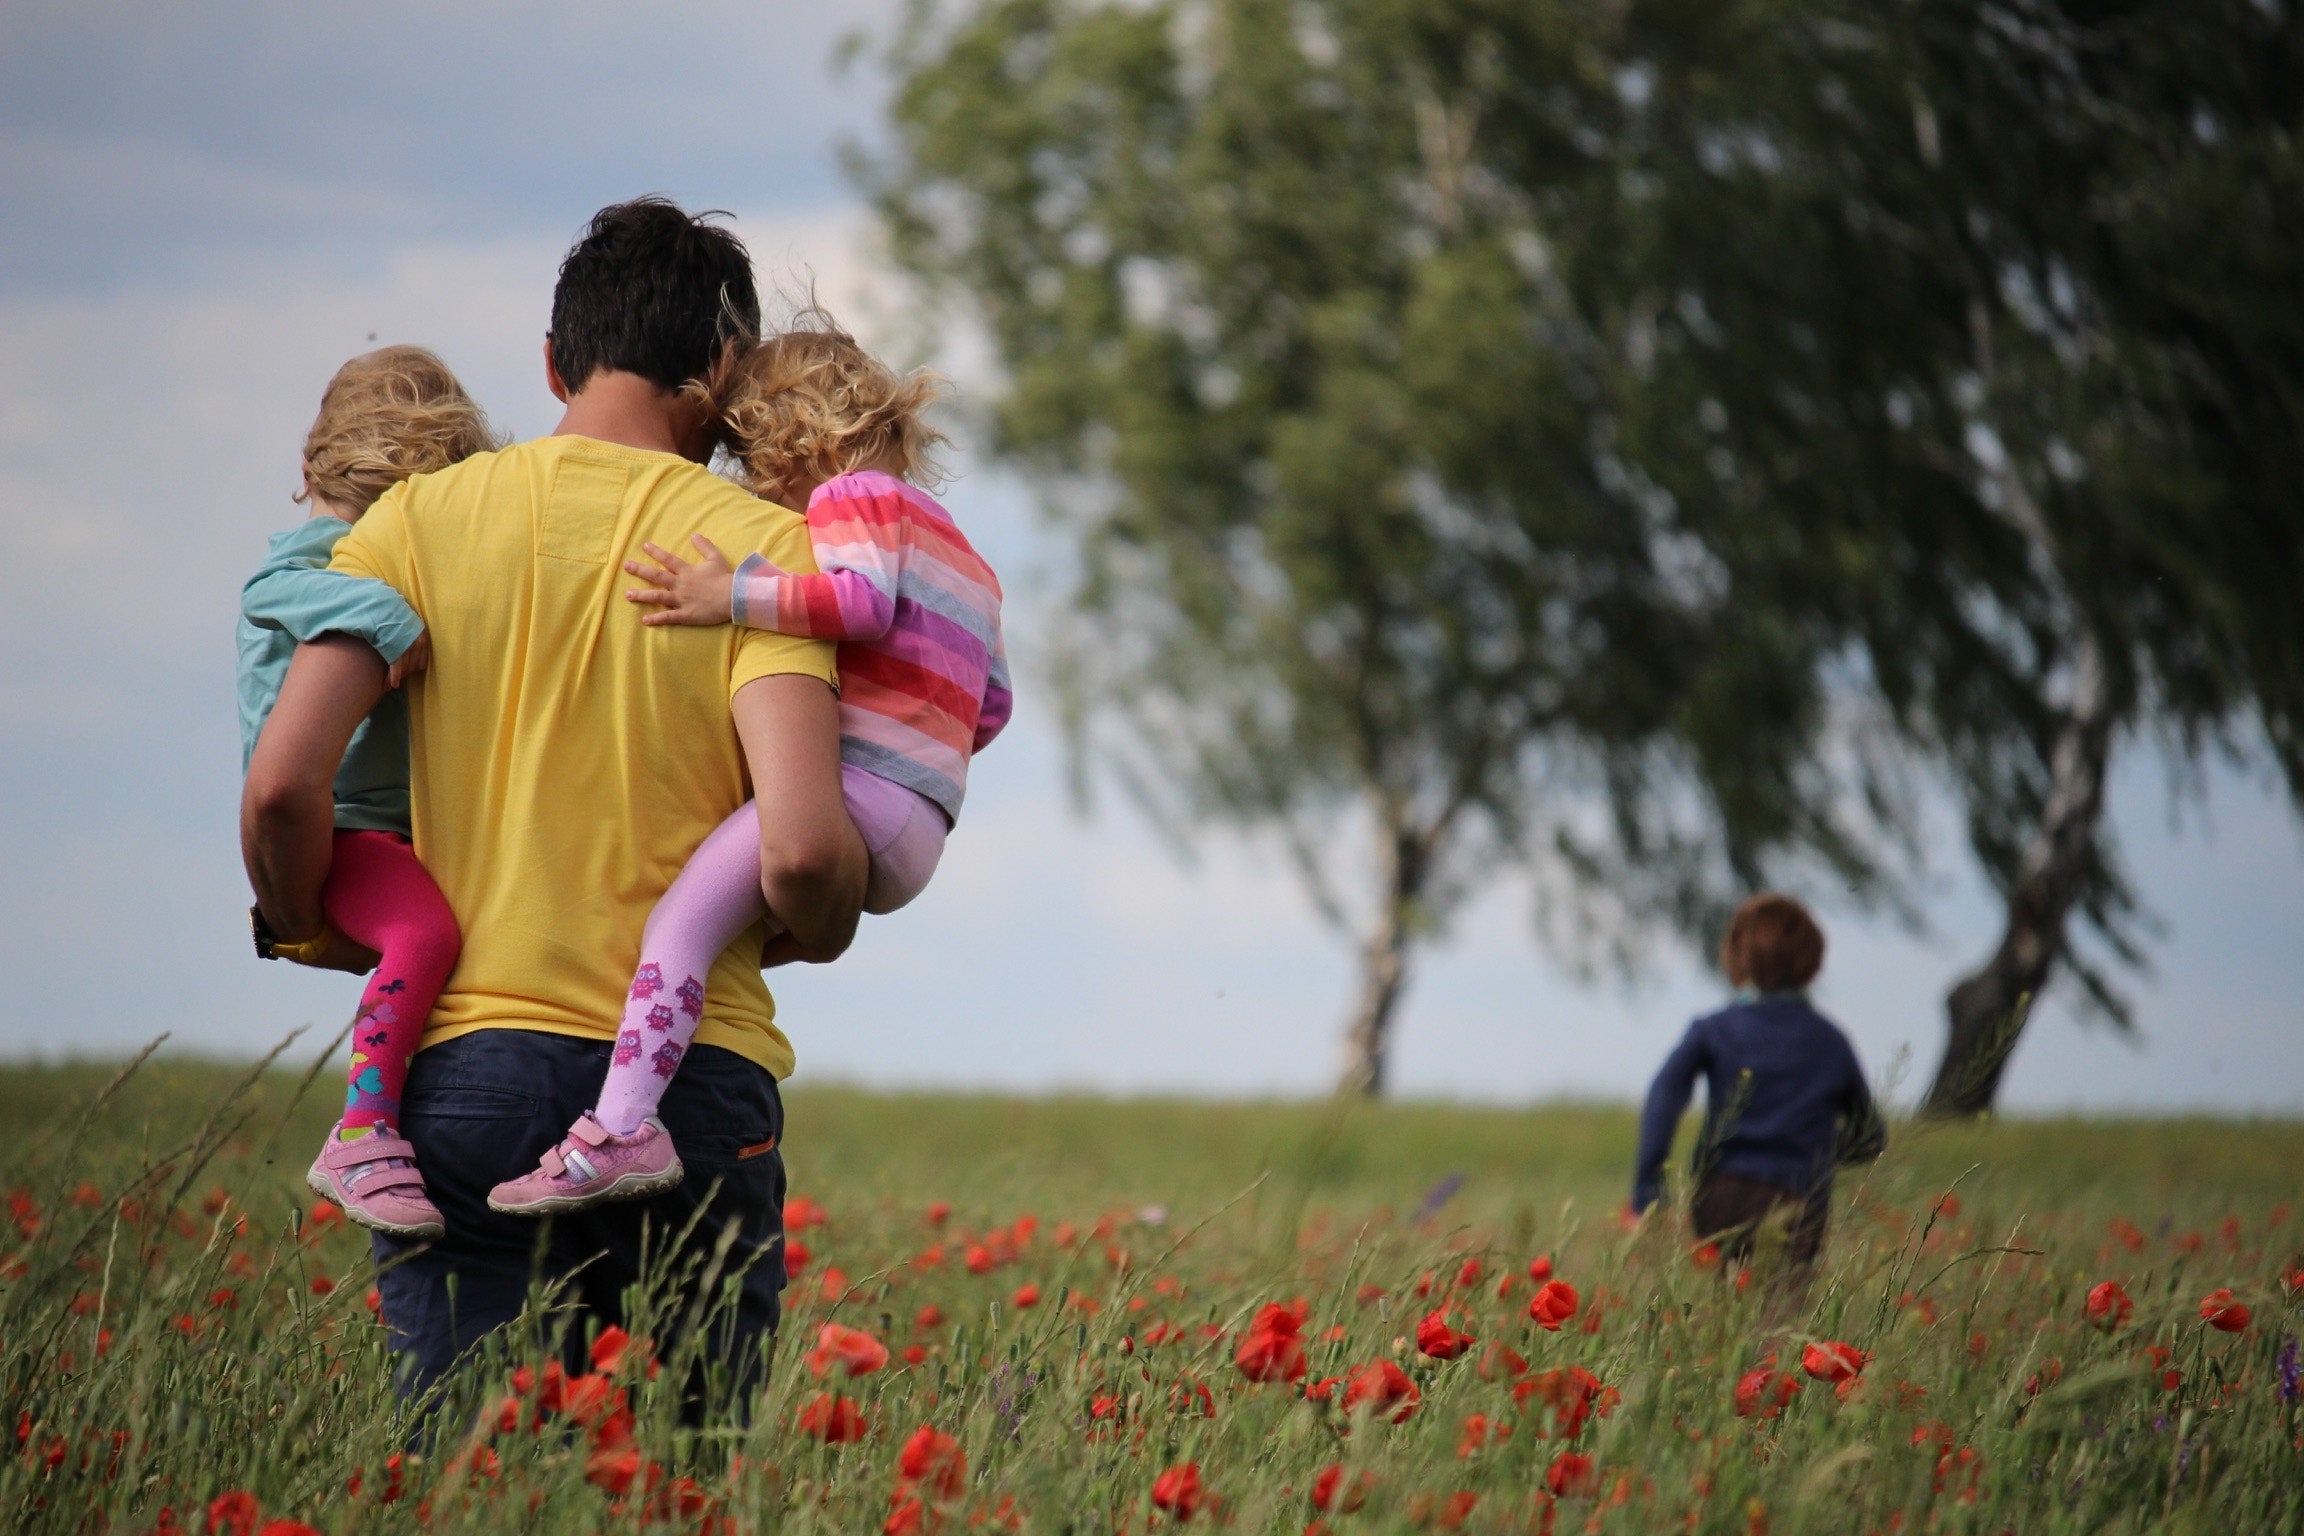 Adult Carrying Two Kids in a Field With Third Kid in The Distance by a Tree